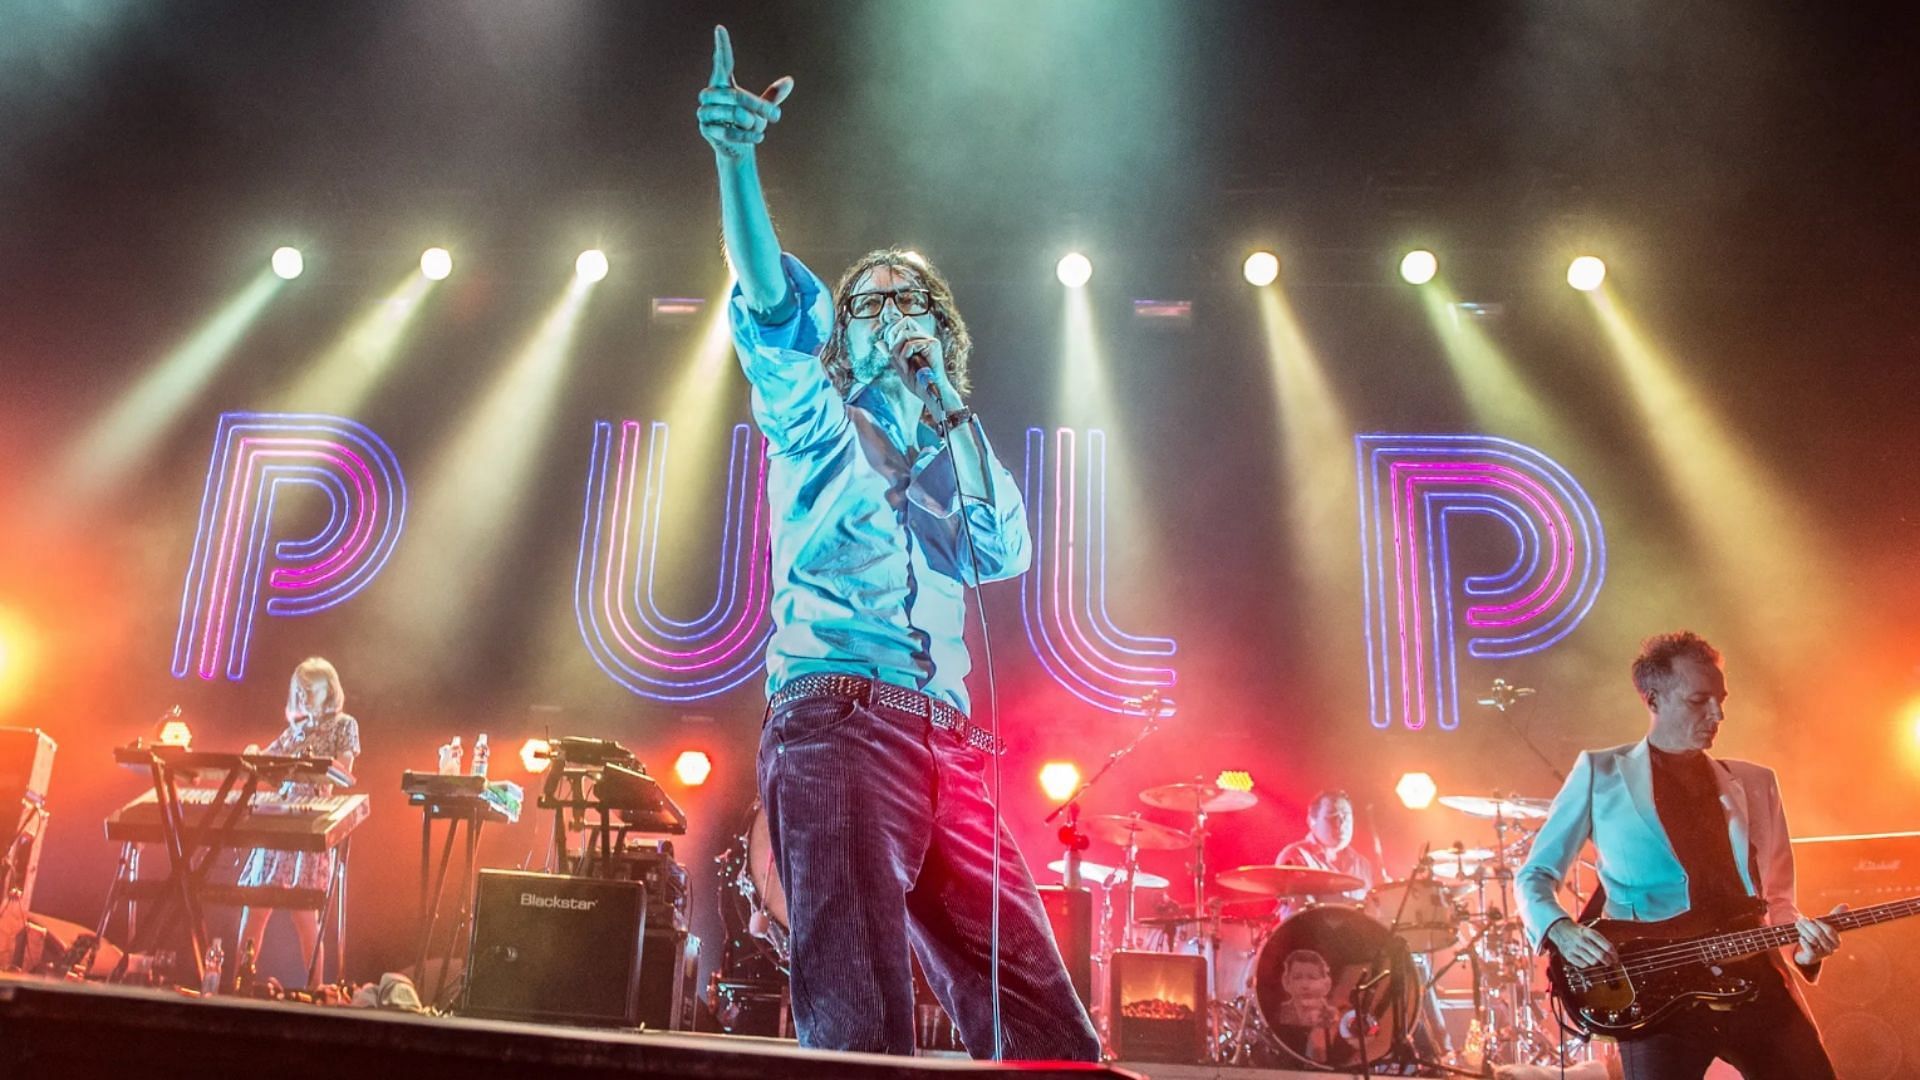 Pulp Tour 2023 Tickets, presale, where to buy, price, dates and more